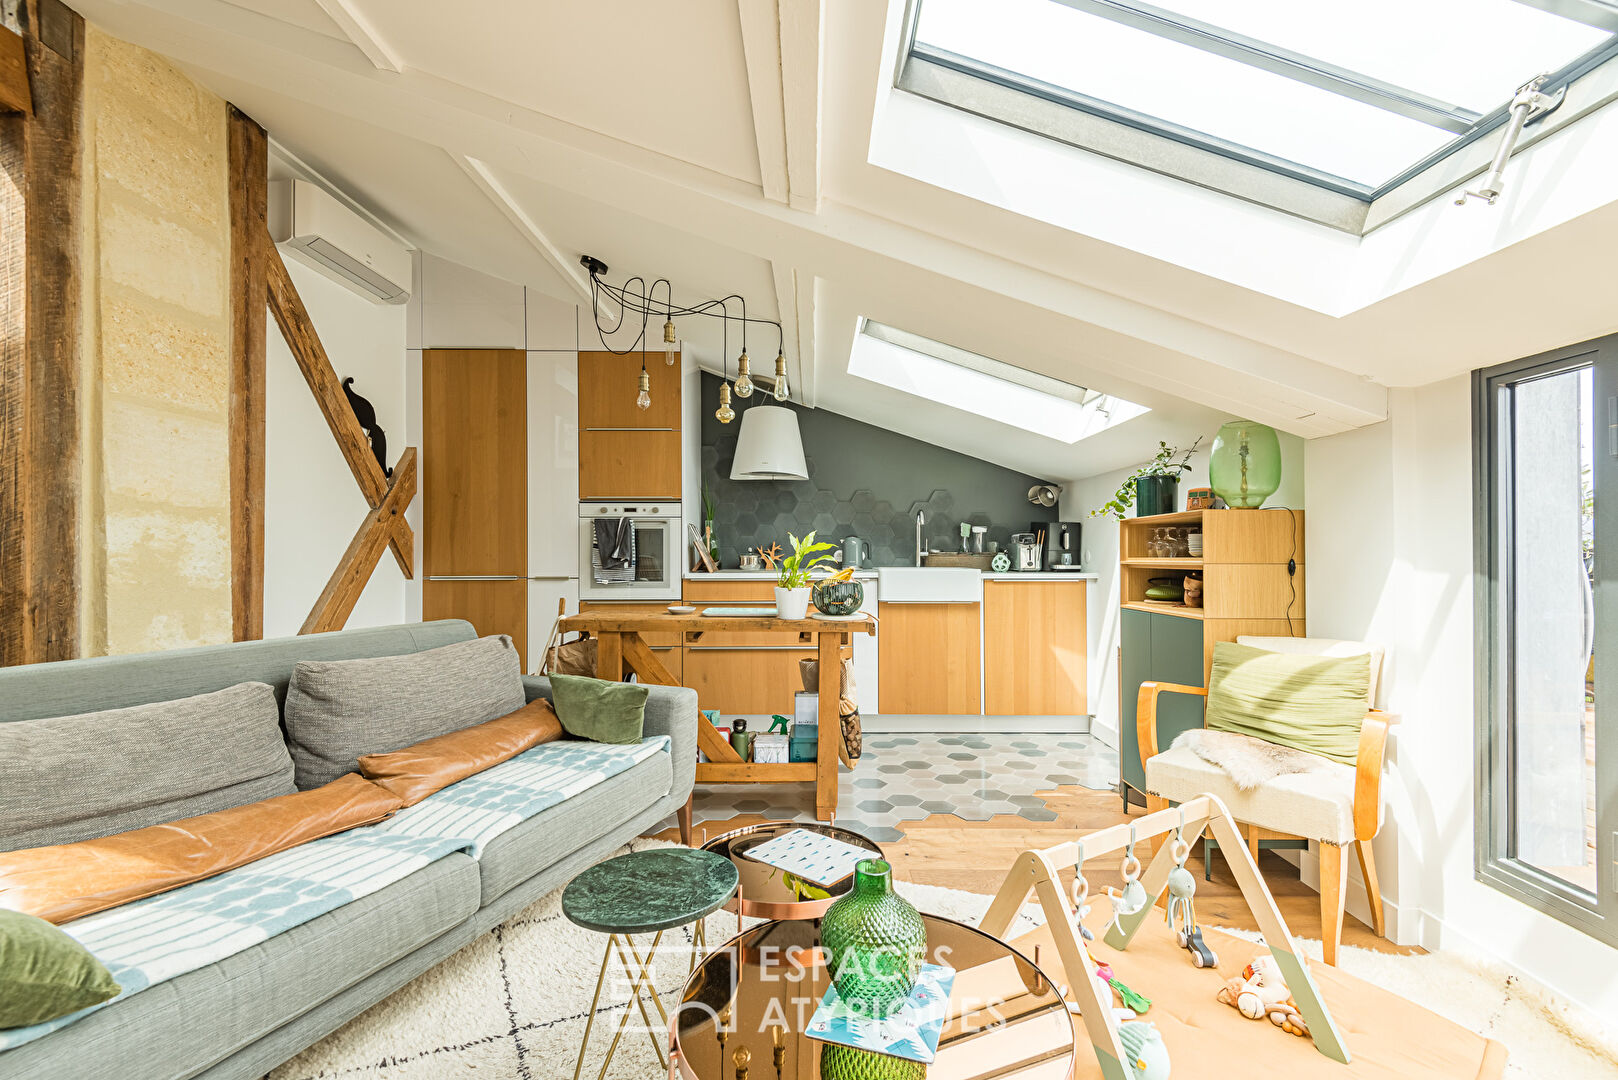 The cozy attic apartment with a view